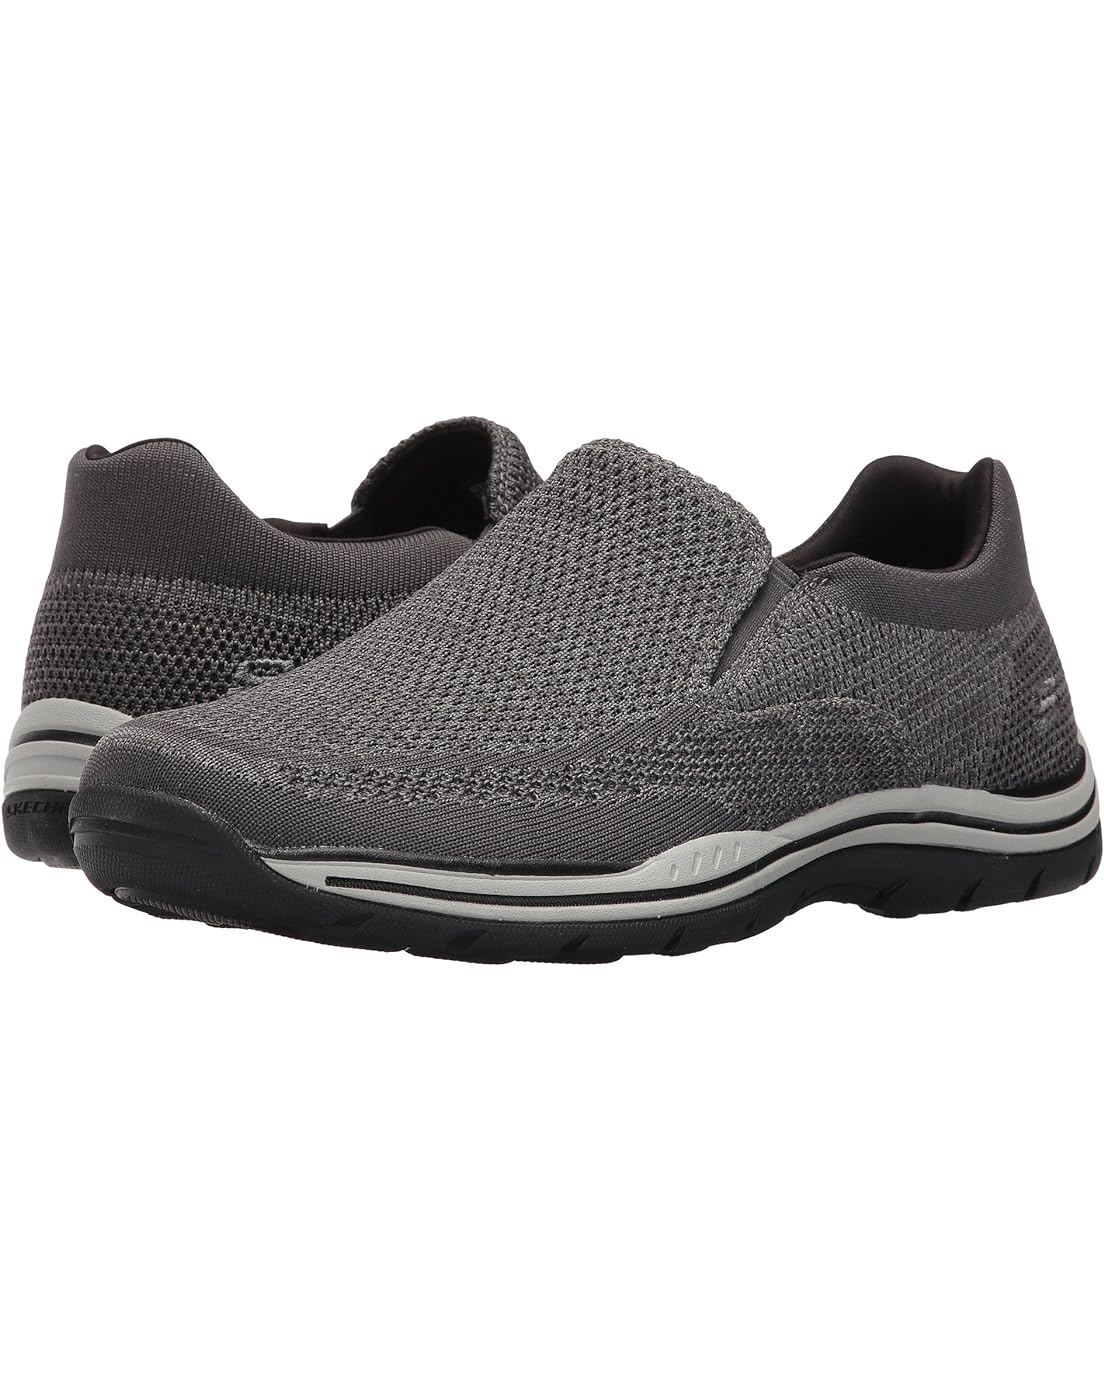 SKECHERS Relaxed Fit Expected - Gomel